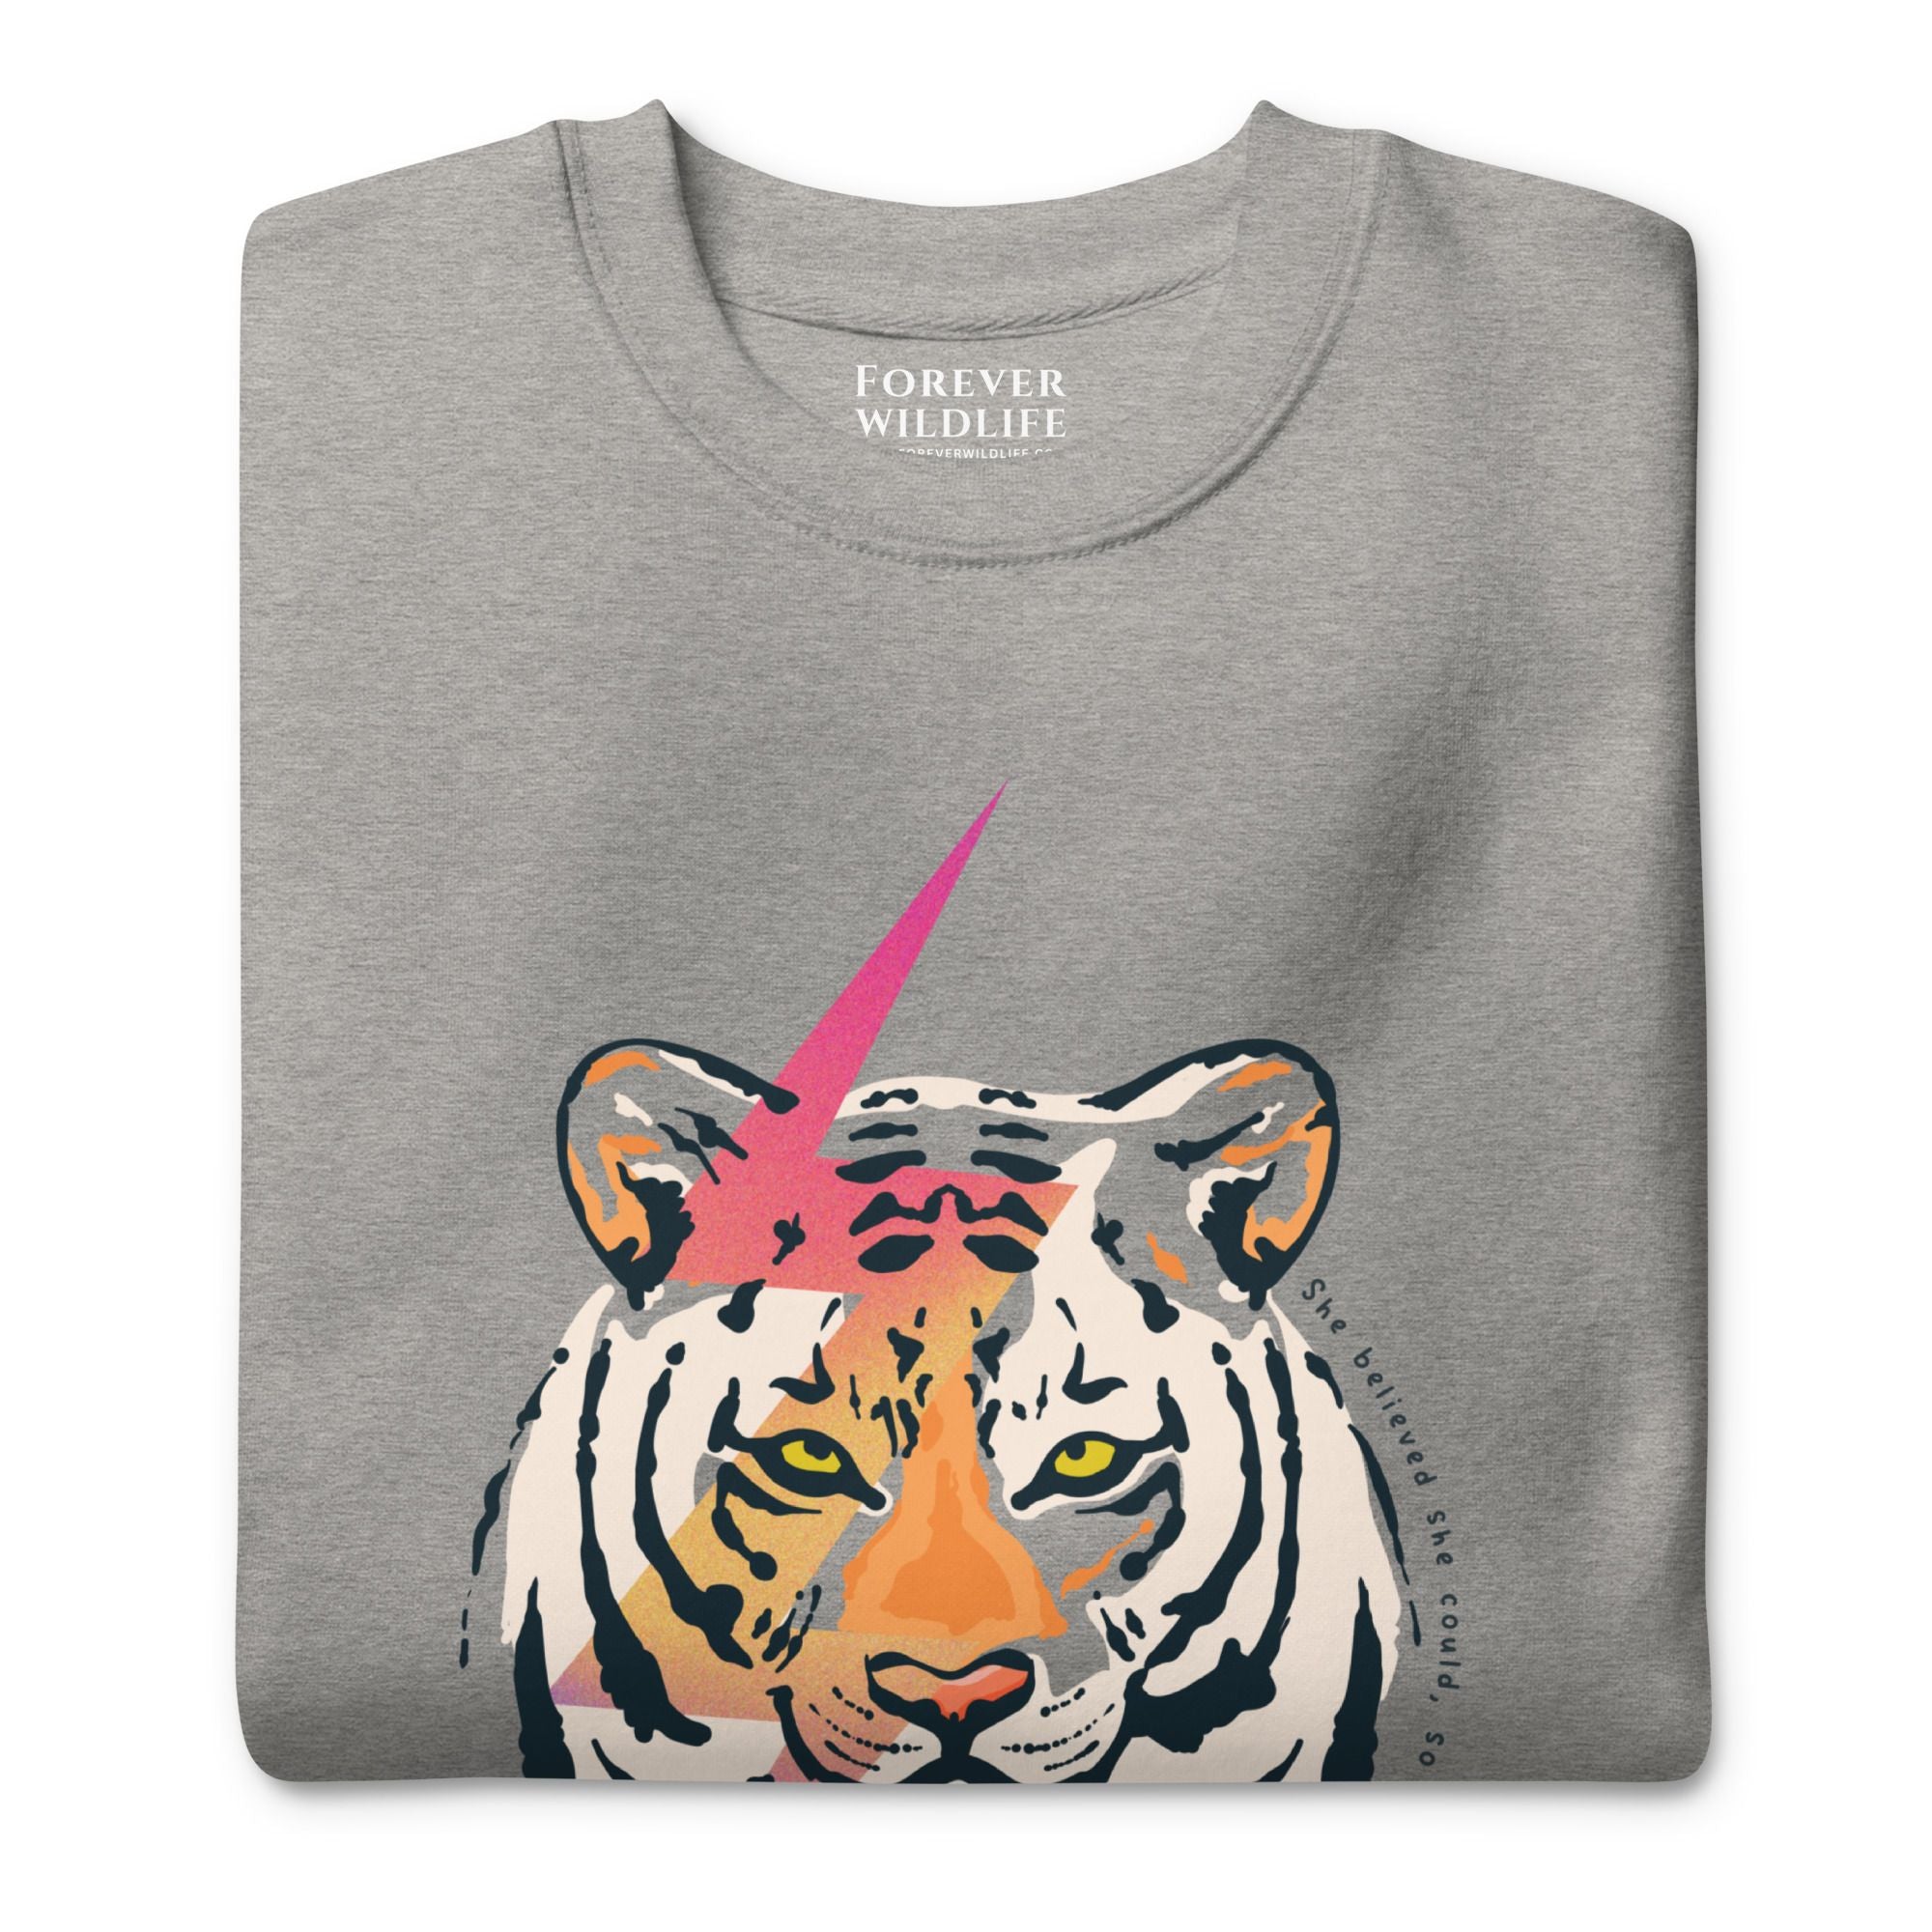 SHE BELIEVED SHE COULD SO SHE DID TIGER SWEATSHIRT